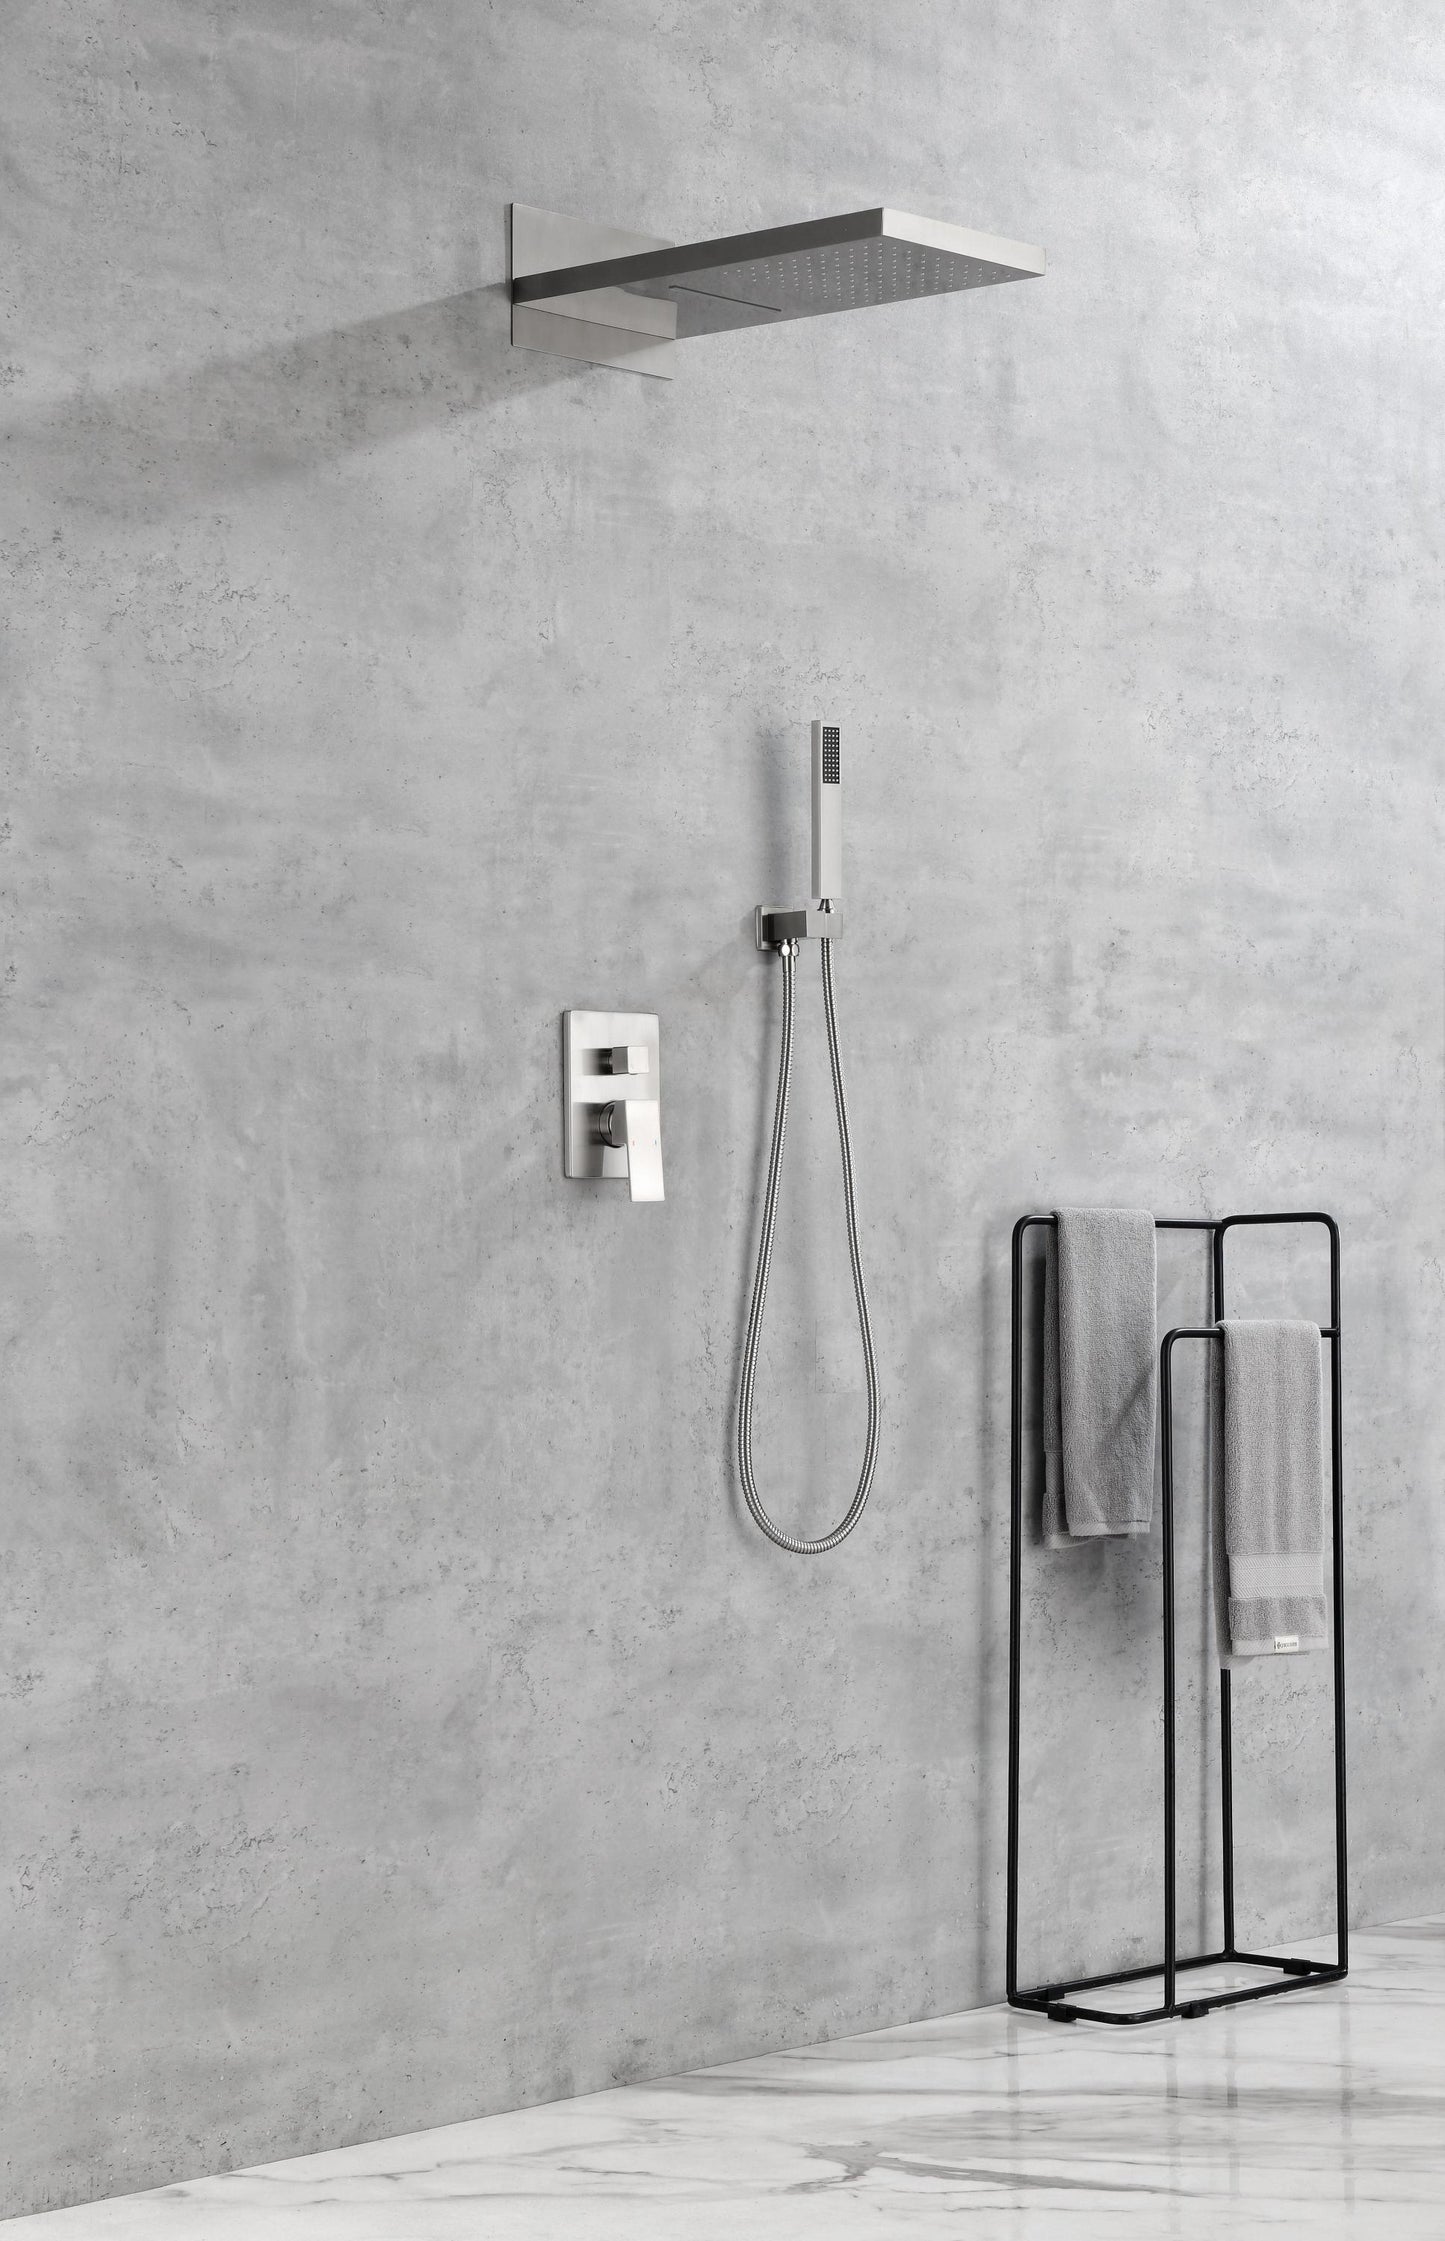 Shower System,Waterfall Rainfall Shower Head with Handheld, Shower Faucet Set for Bathroom Wall Mounted